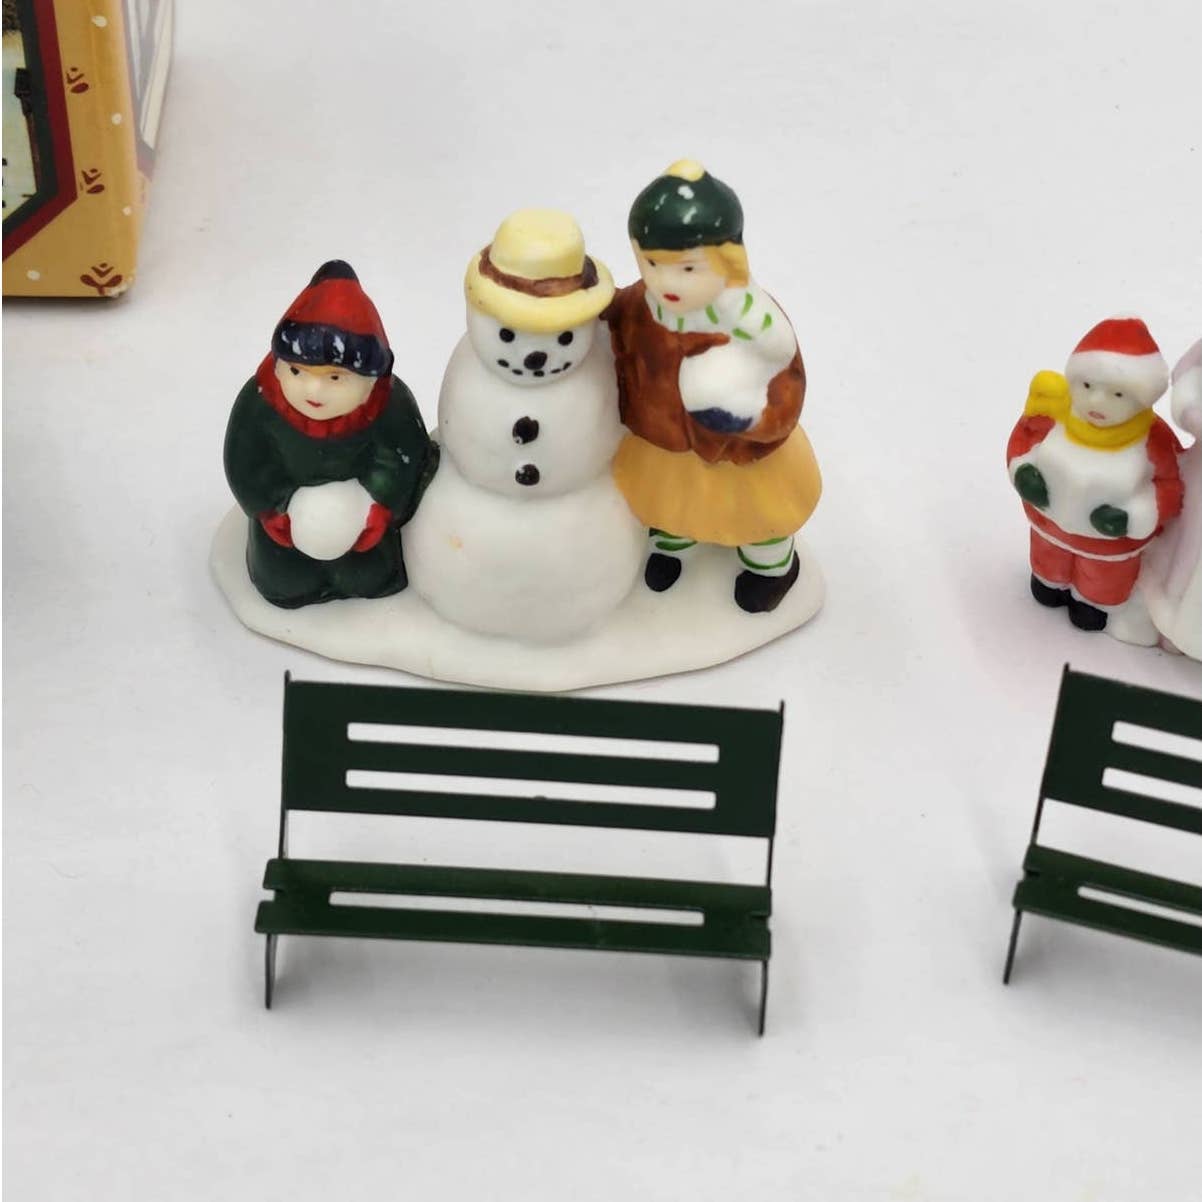 Vintage Christmas Village Figurines Mixed Lot 6 Avon Country Bench, Carolers